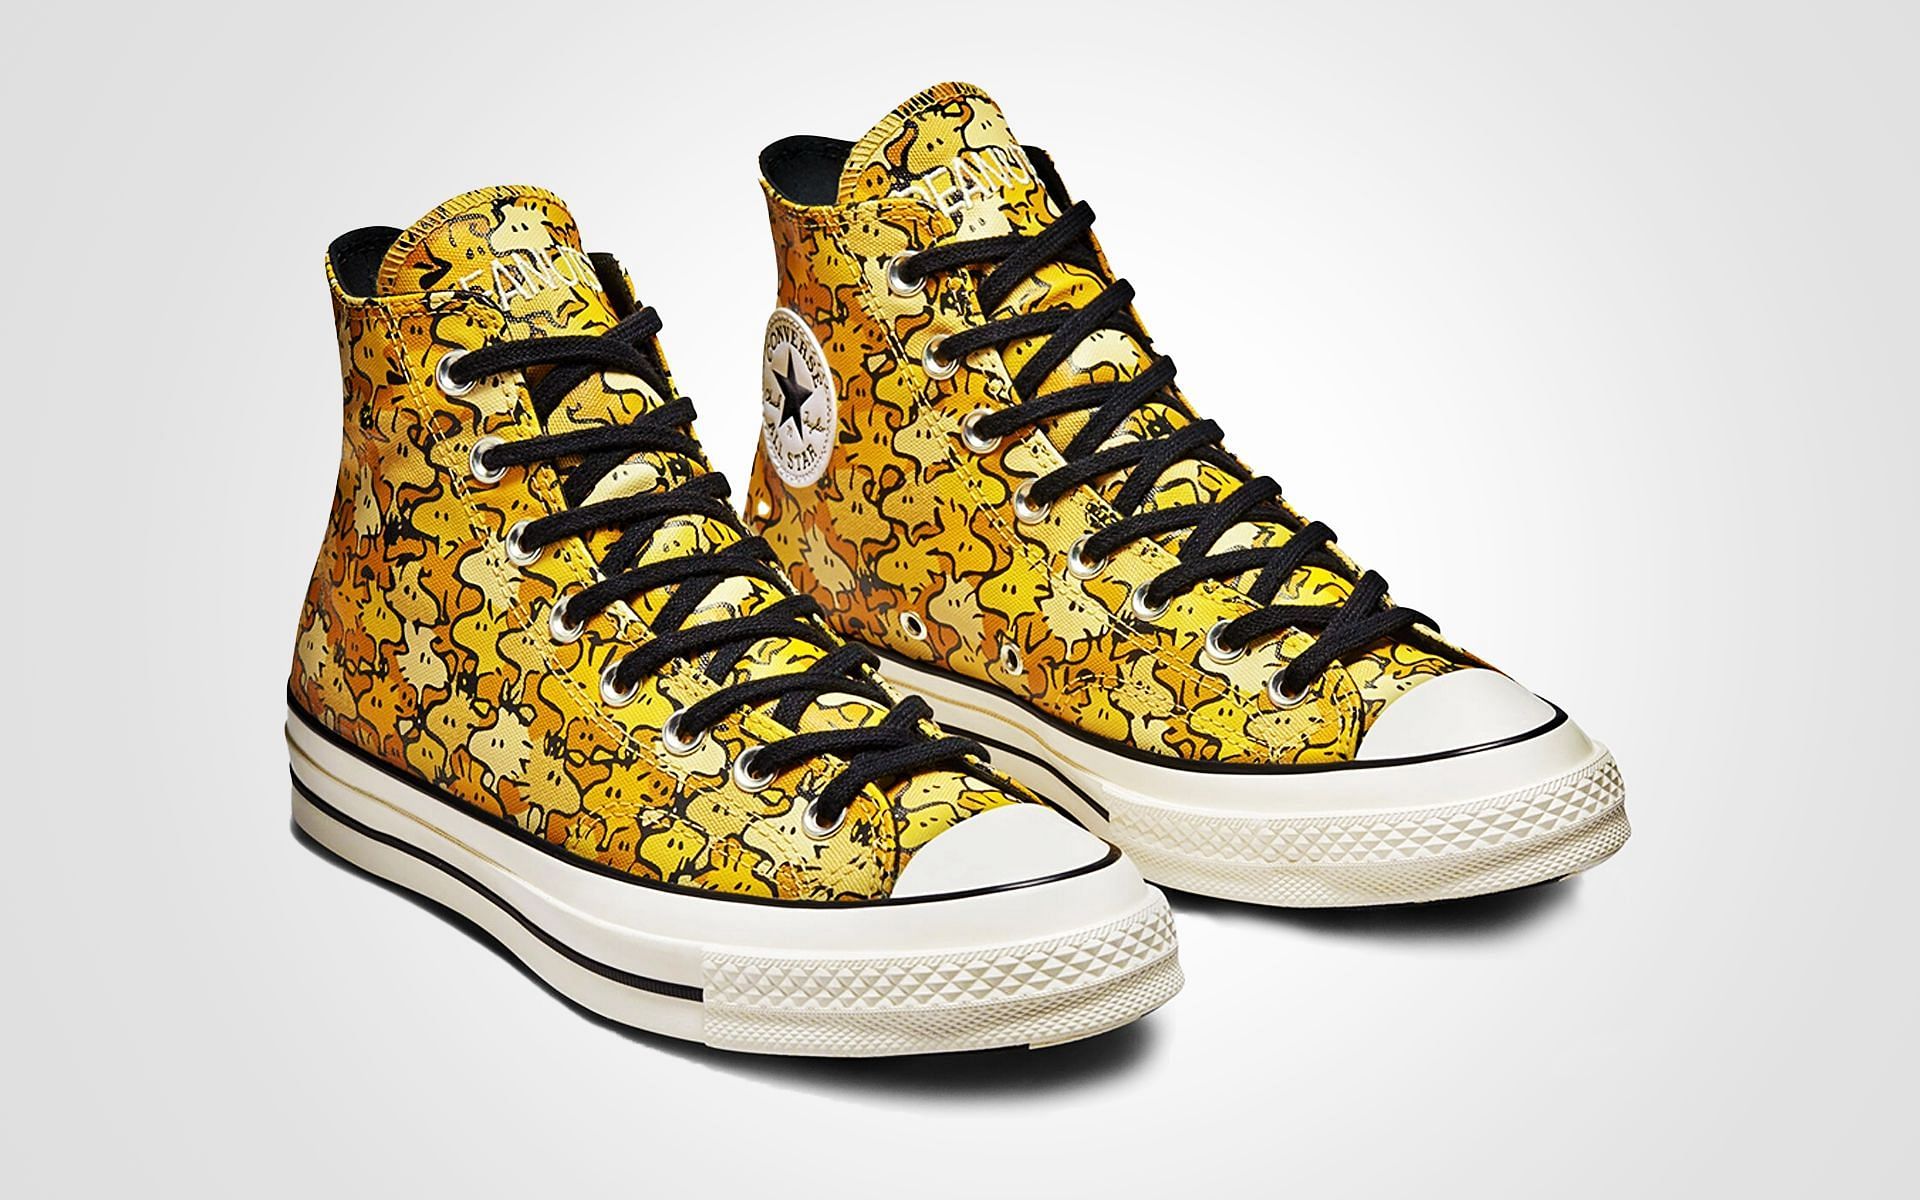 Converse x Peanuts team up for the Woodstock footwear collection (Image via Converse)